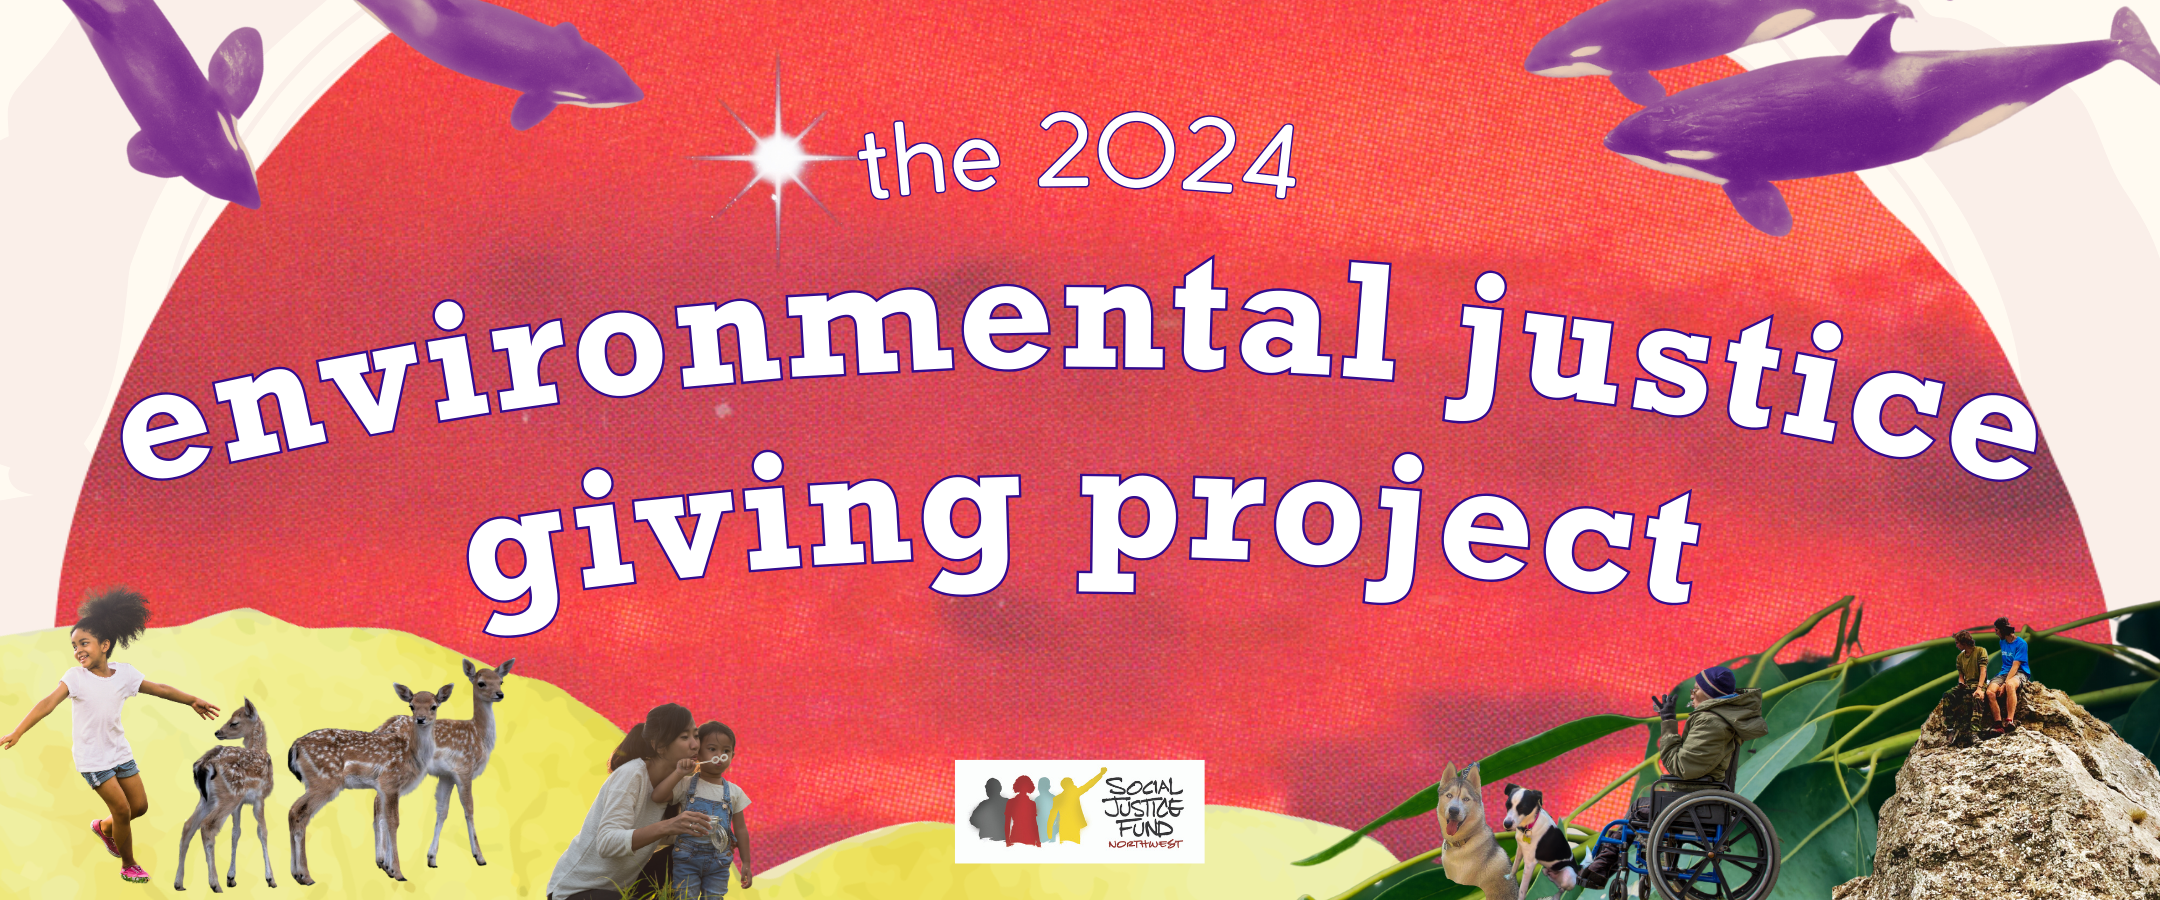 Banner image with colorful collage background featuring animals humans and flora. Text reads The 2024 Environmental Justice Giving Project